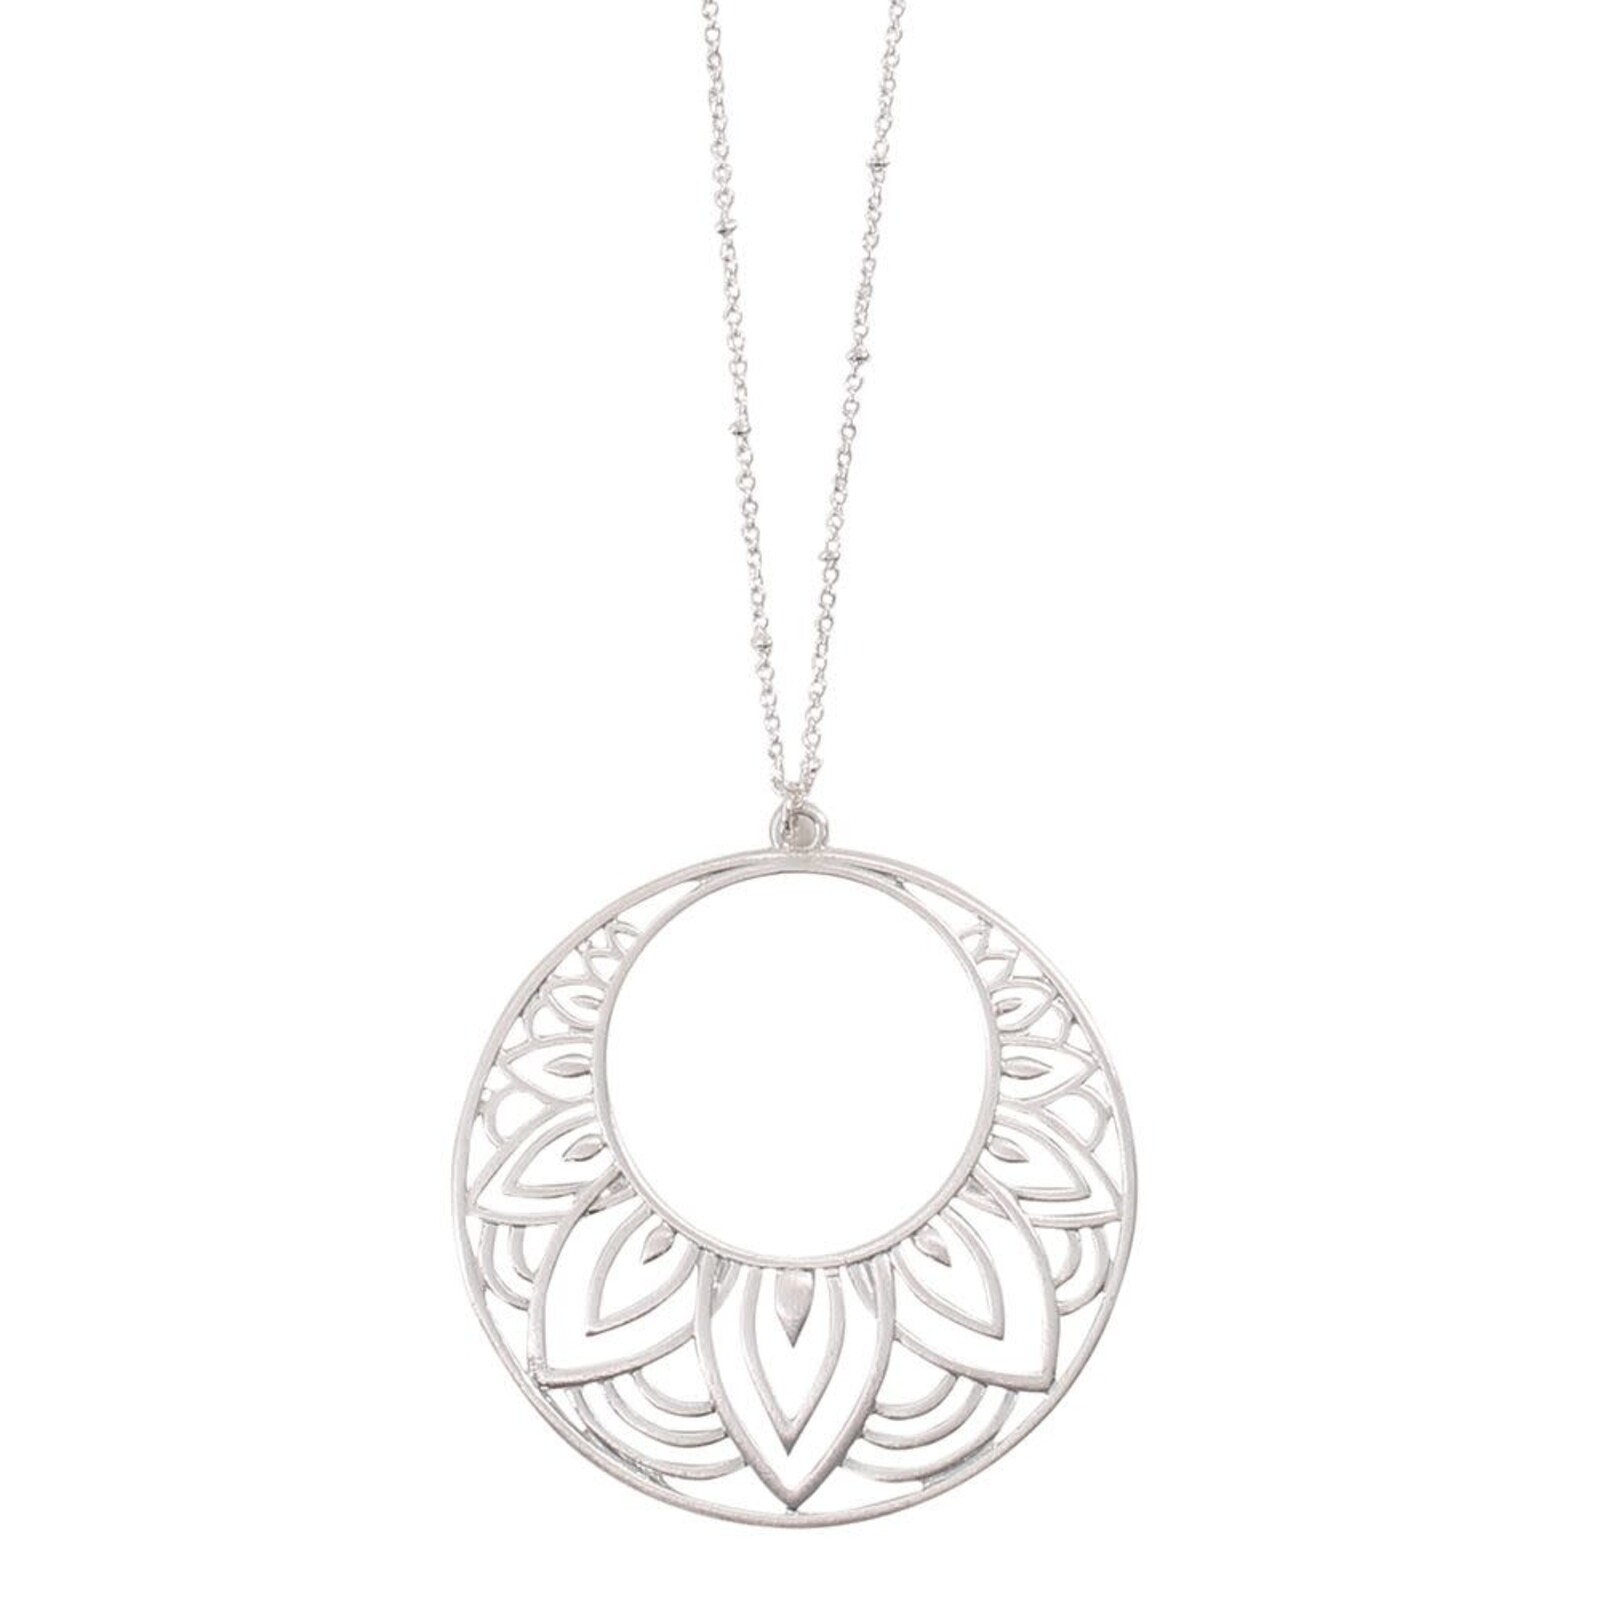 Periwinkle by Barlow Necklace-Silver Detailed Disc   8151323 loading=